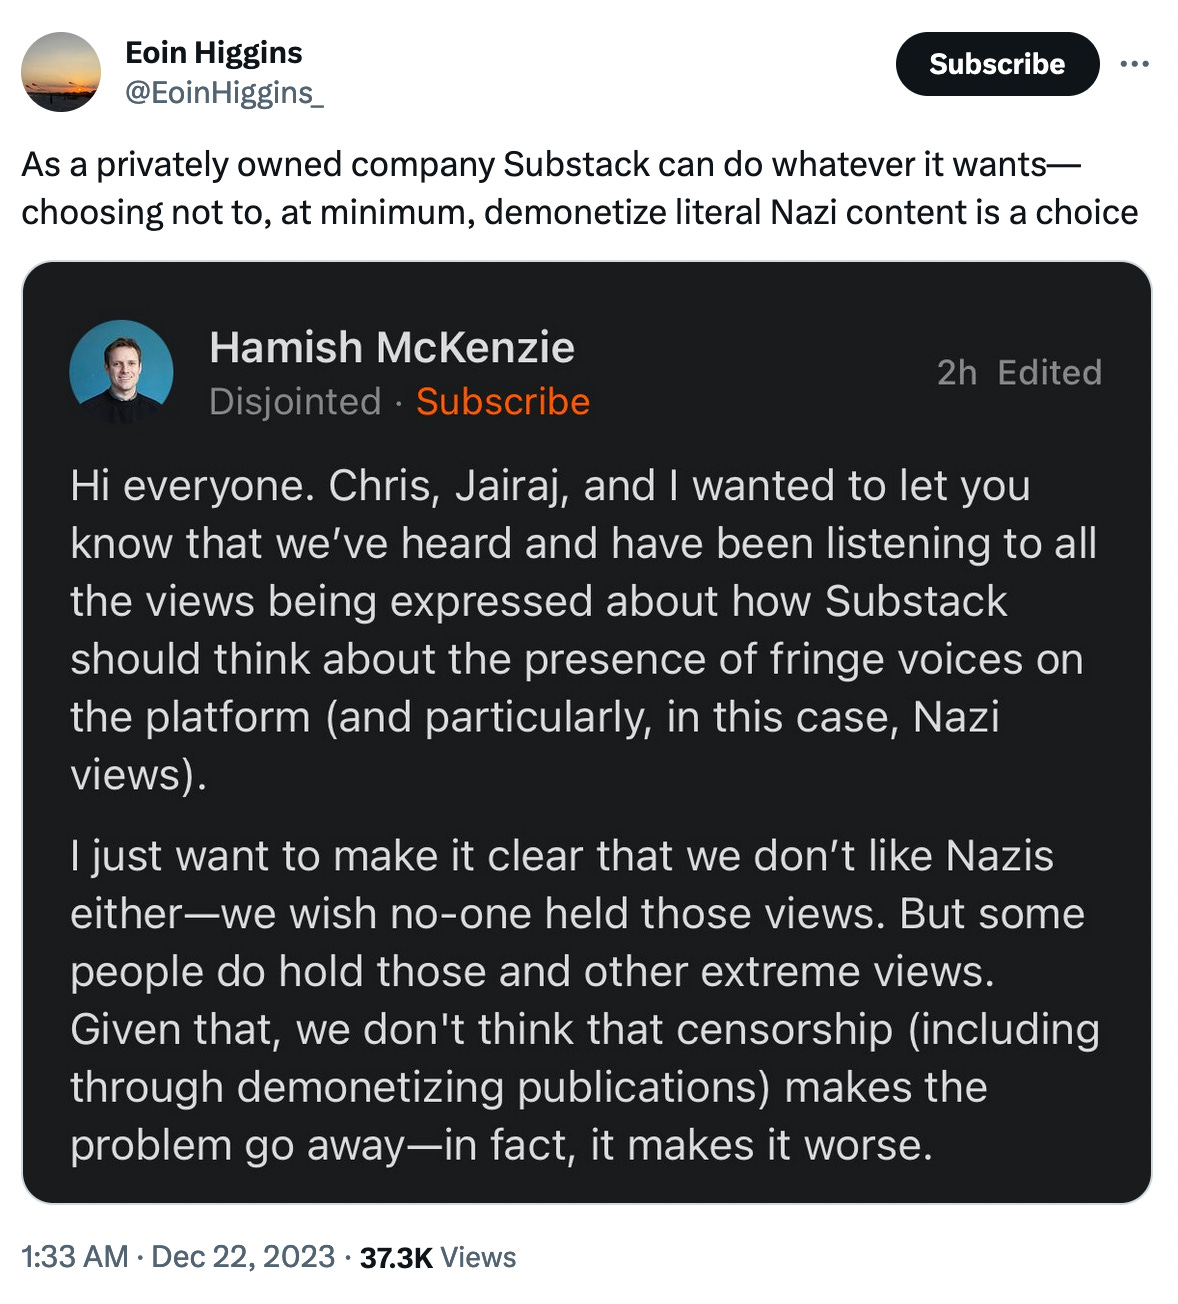 @EoinHiggins_: As a privately owned company Substack can do whatever it wants—choosing not to, at minimum, demonetize literal Nazi content is a choice. Tweet includes a screenshot of a message from Hamish McKenzie, which reads: "Hi everyone. Chris, Jairaj, and I wanted to let you know that we've heard and have been listening to all the views being expressed about how Substack should think about the presence of fringe voices on the platform (and particularly, in this case, Nazi views). I just want to make it clear that we don't like Nazis either—we wish no-one held those views. But some people do hold those and other extreme views. Given that, we don't think that censorship (including through demonetizing publications) makes the problem go away—in fact, it makes it worse.